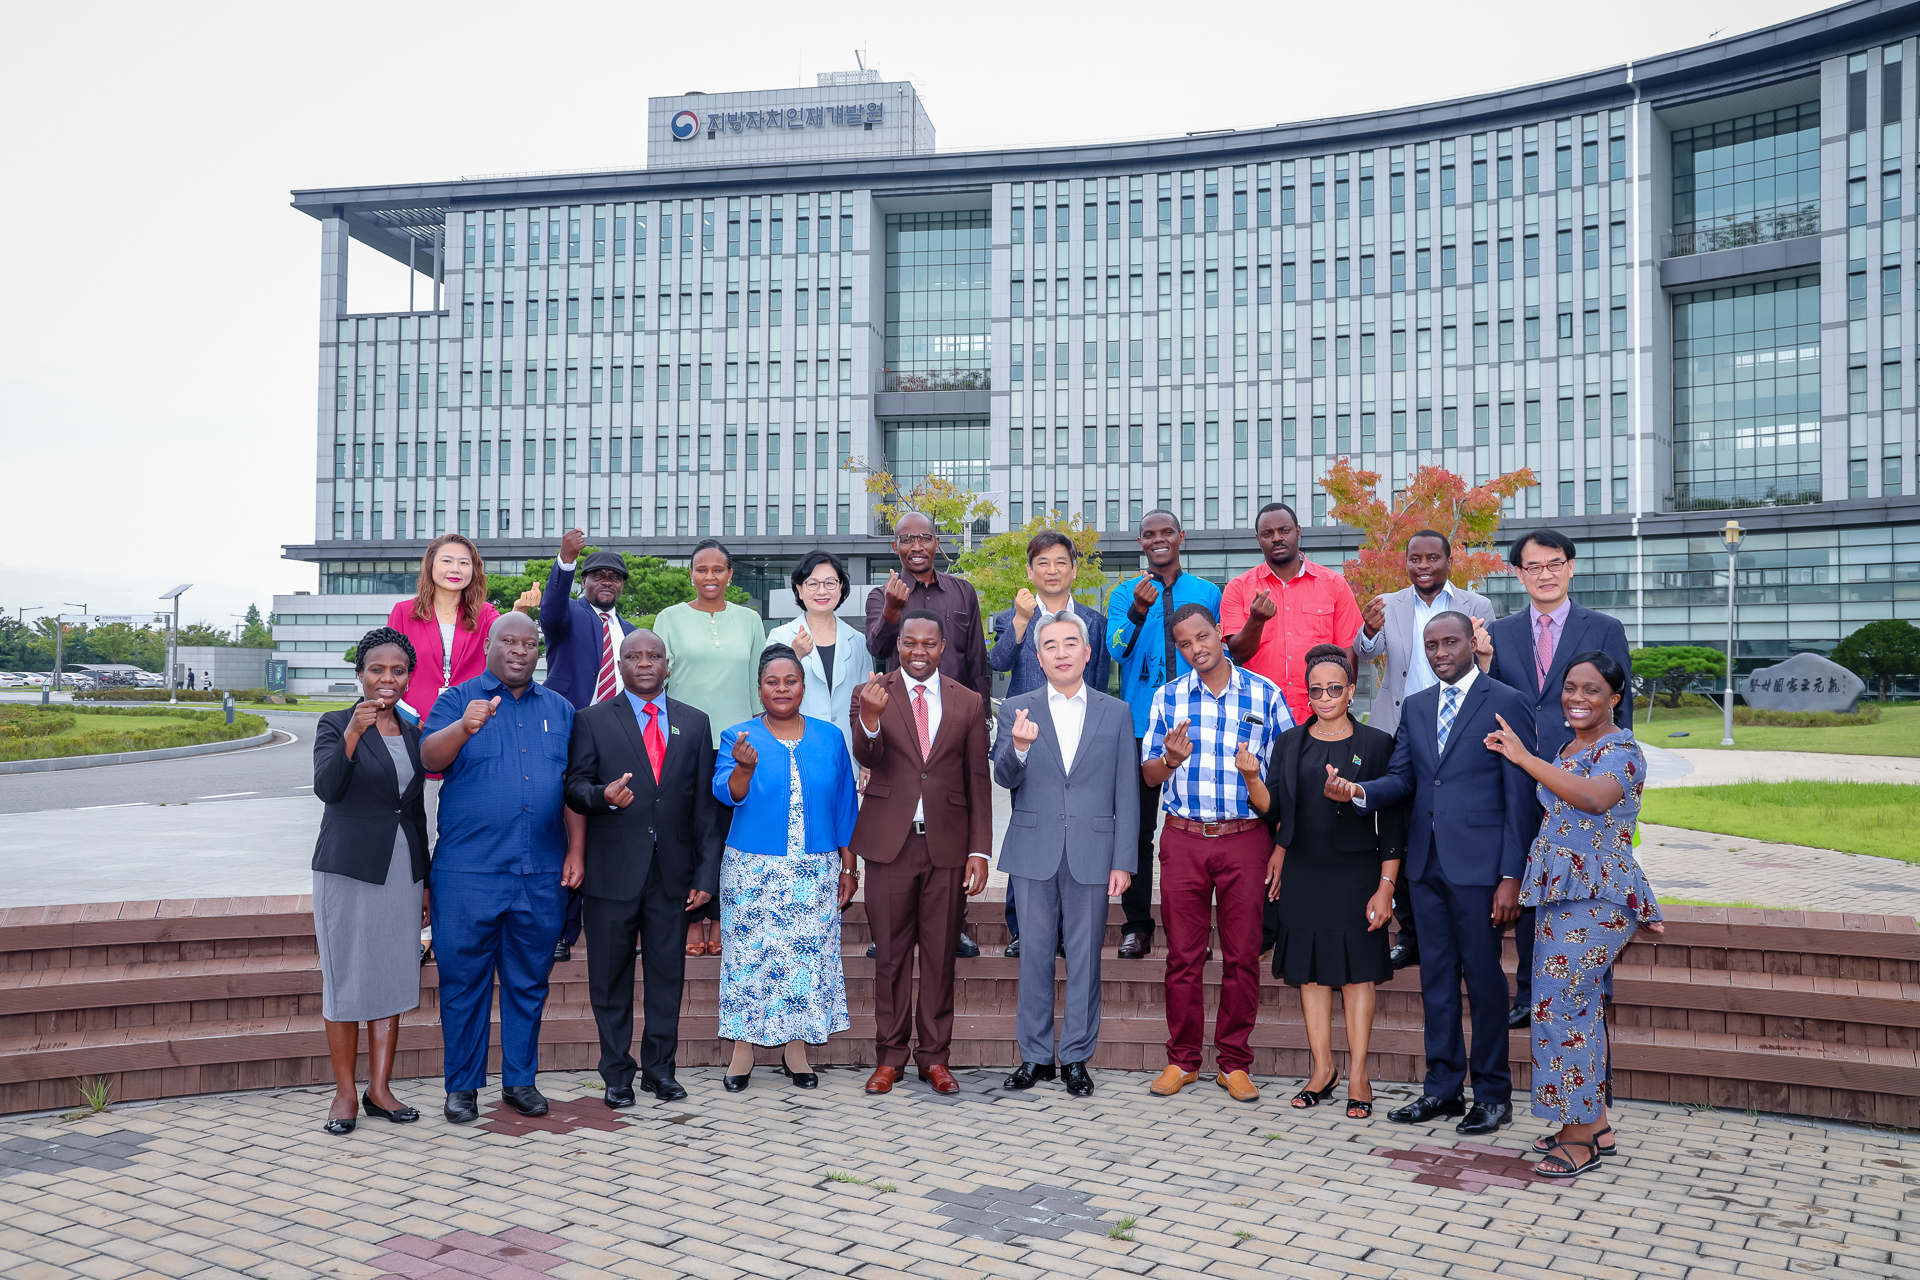 LOGODI concludes the capacity building program for Tanzanian officials on Local Government Administration and Leadership Management.  큰 이미지[마우스 클릭 시 창닫기]